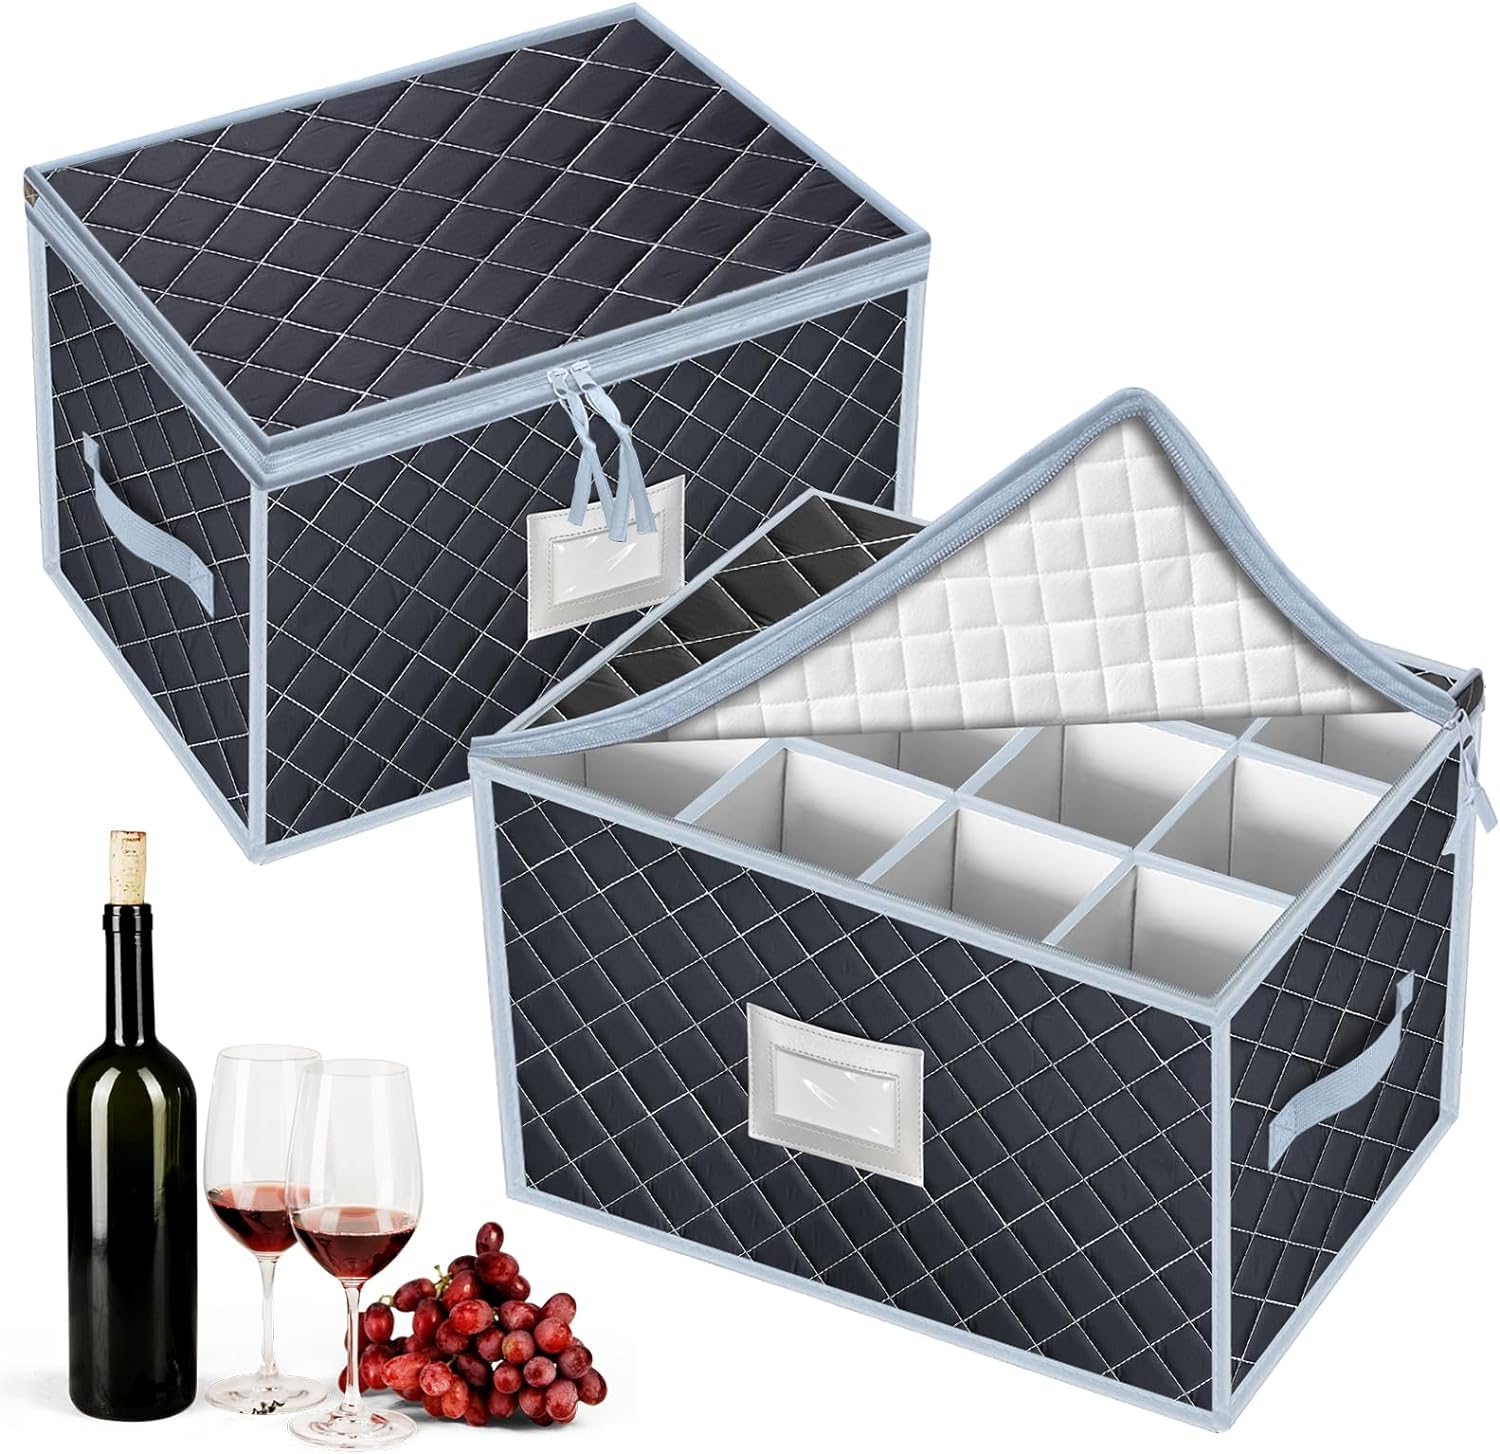 VERONLY Wine Glass Storage Box with Dividers Holds 24 Stemware Storage Cases or China Crystal Glassware Containers with Handles and Lable Window (15.5" x 12.5"x10")-Set of 2 Grey